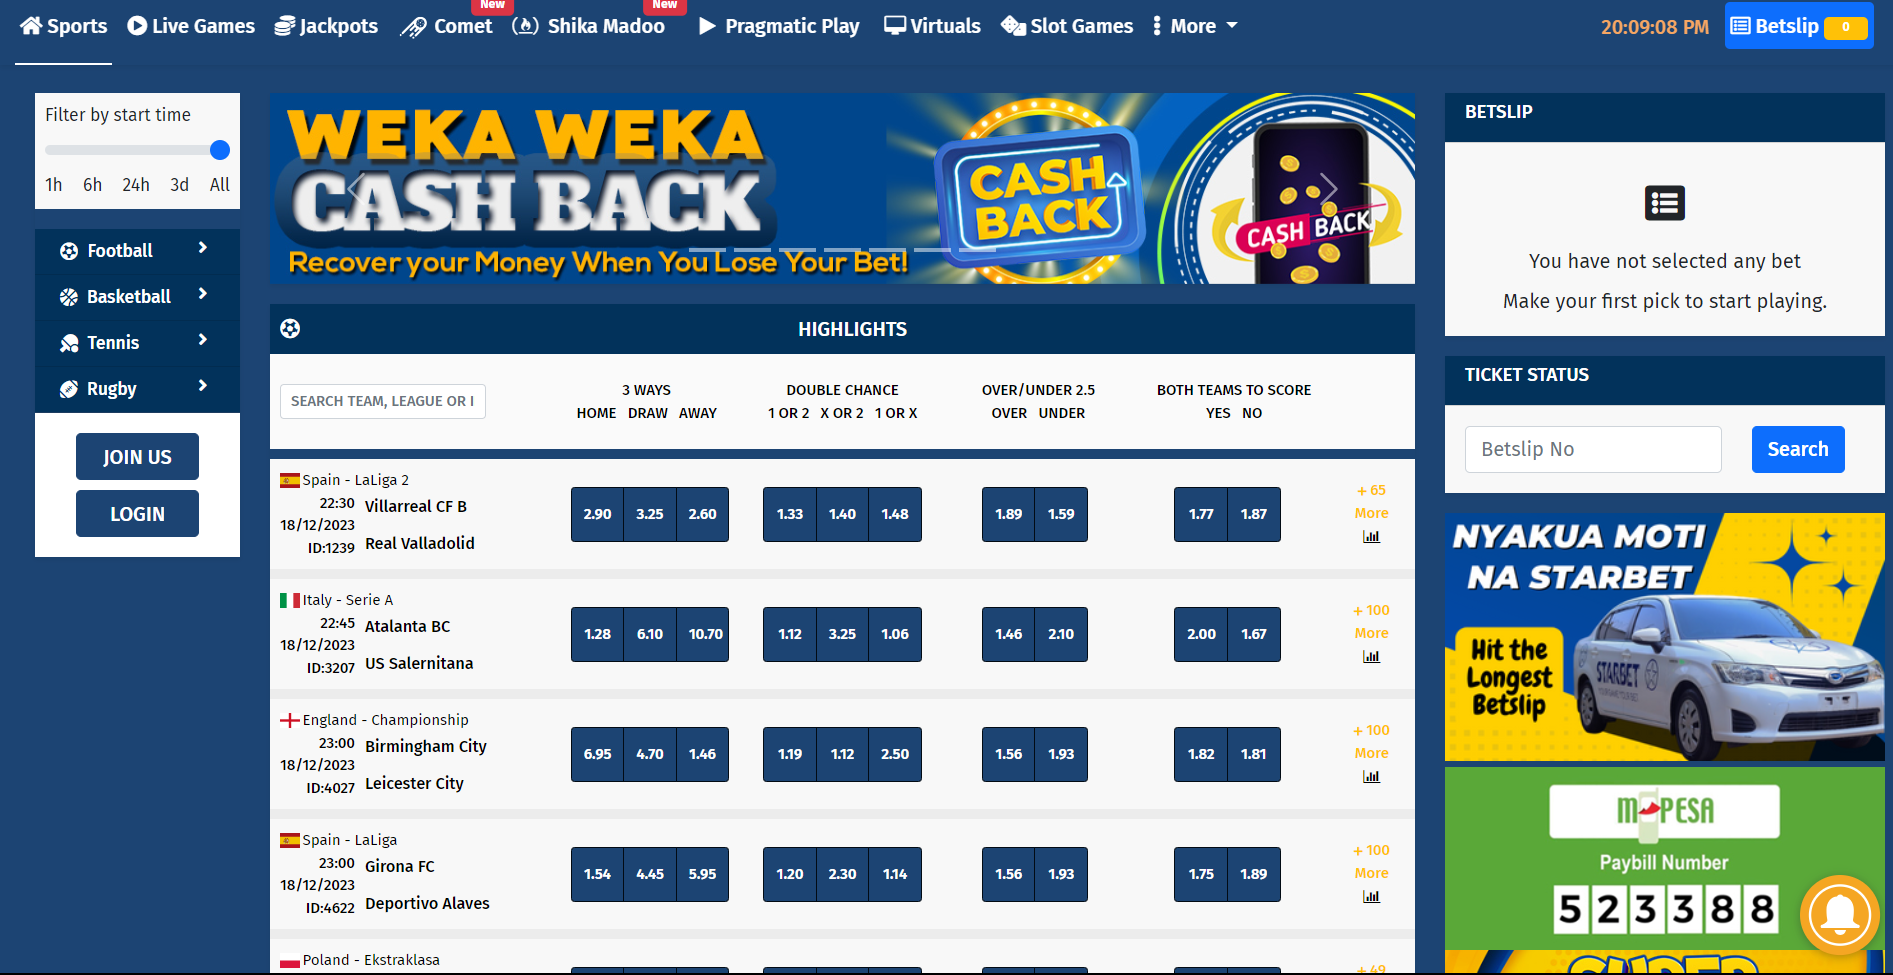 An image showing the Starbet Online Sports Betting